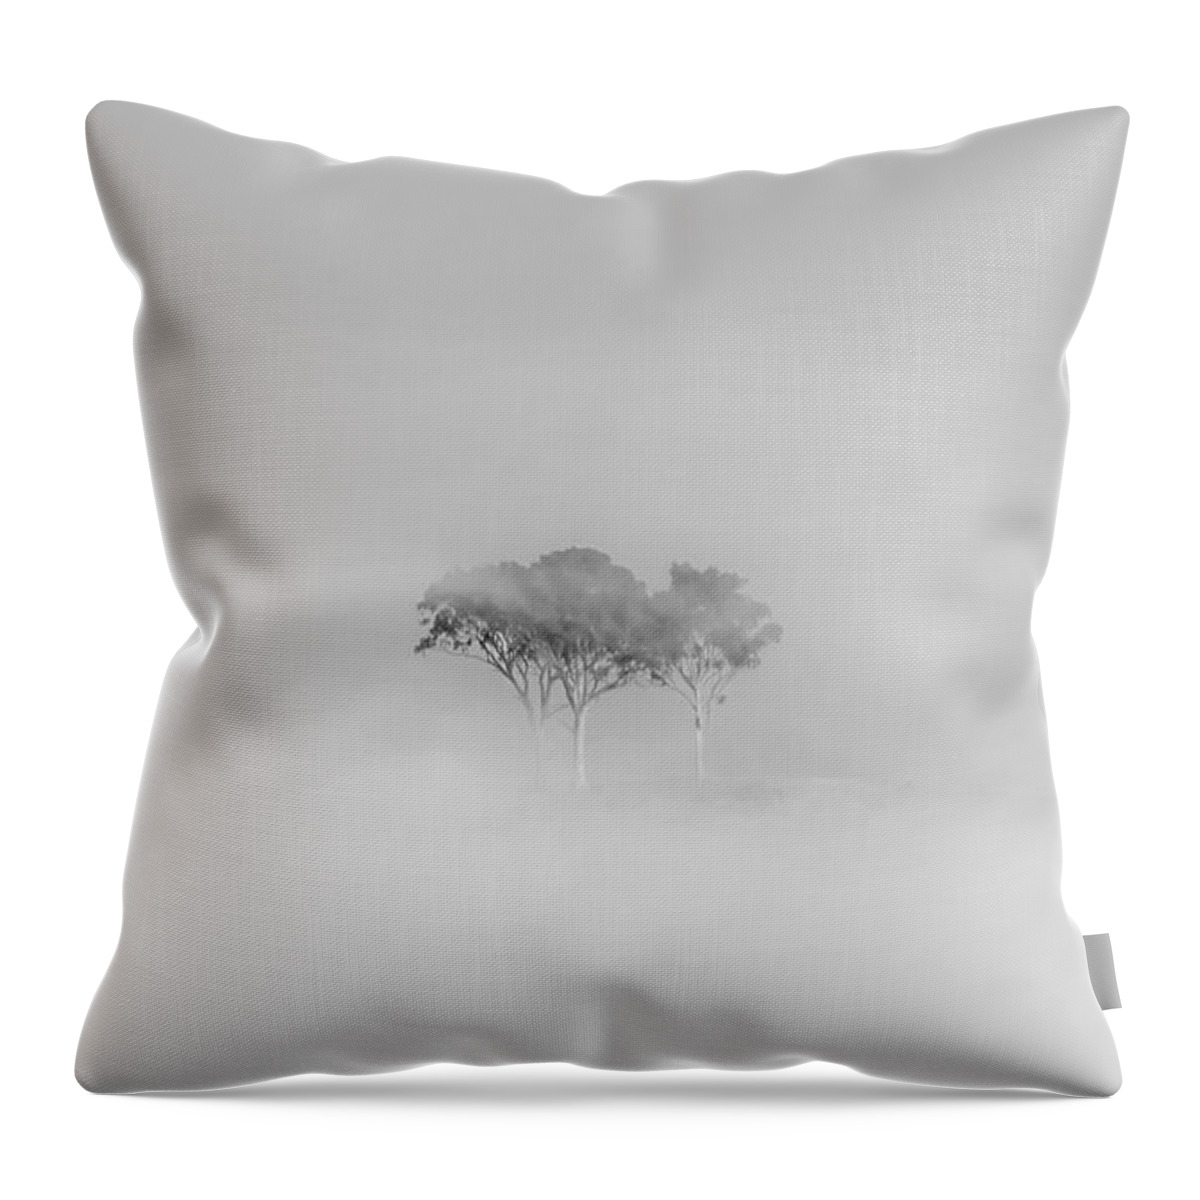 Black And White Throw Pillow featuring the photograph Mystique by Az Jackson